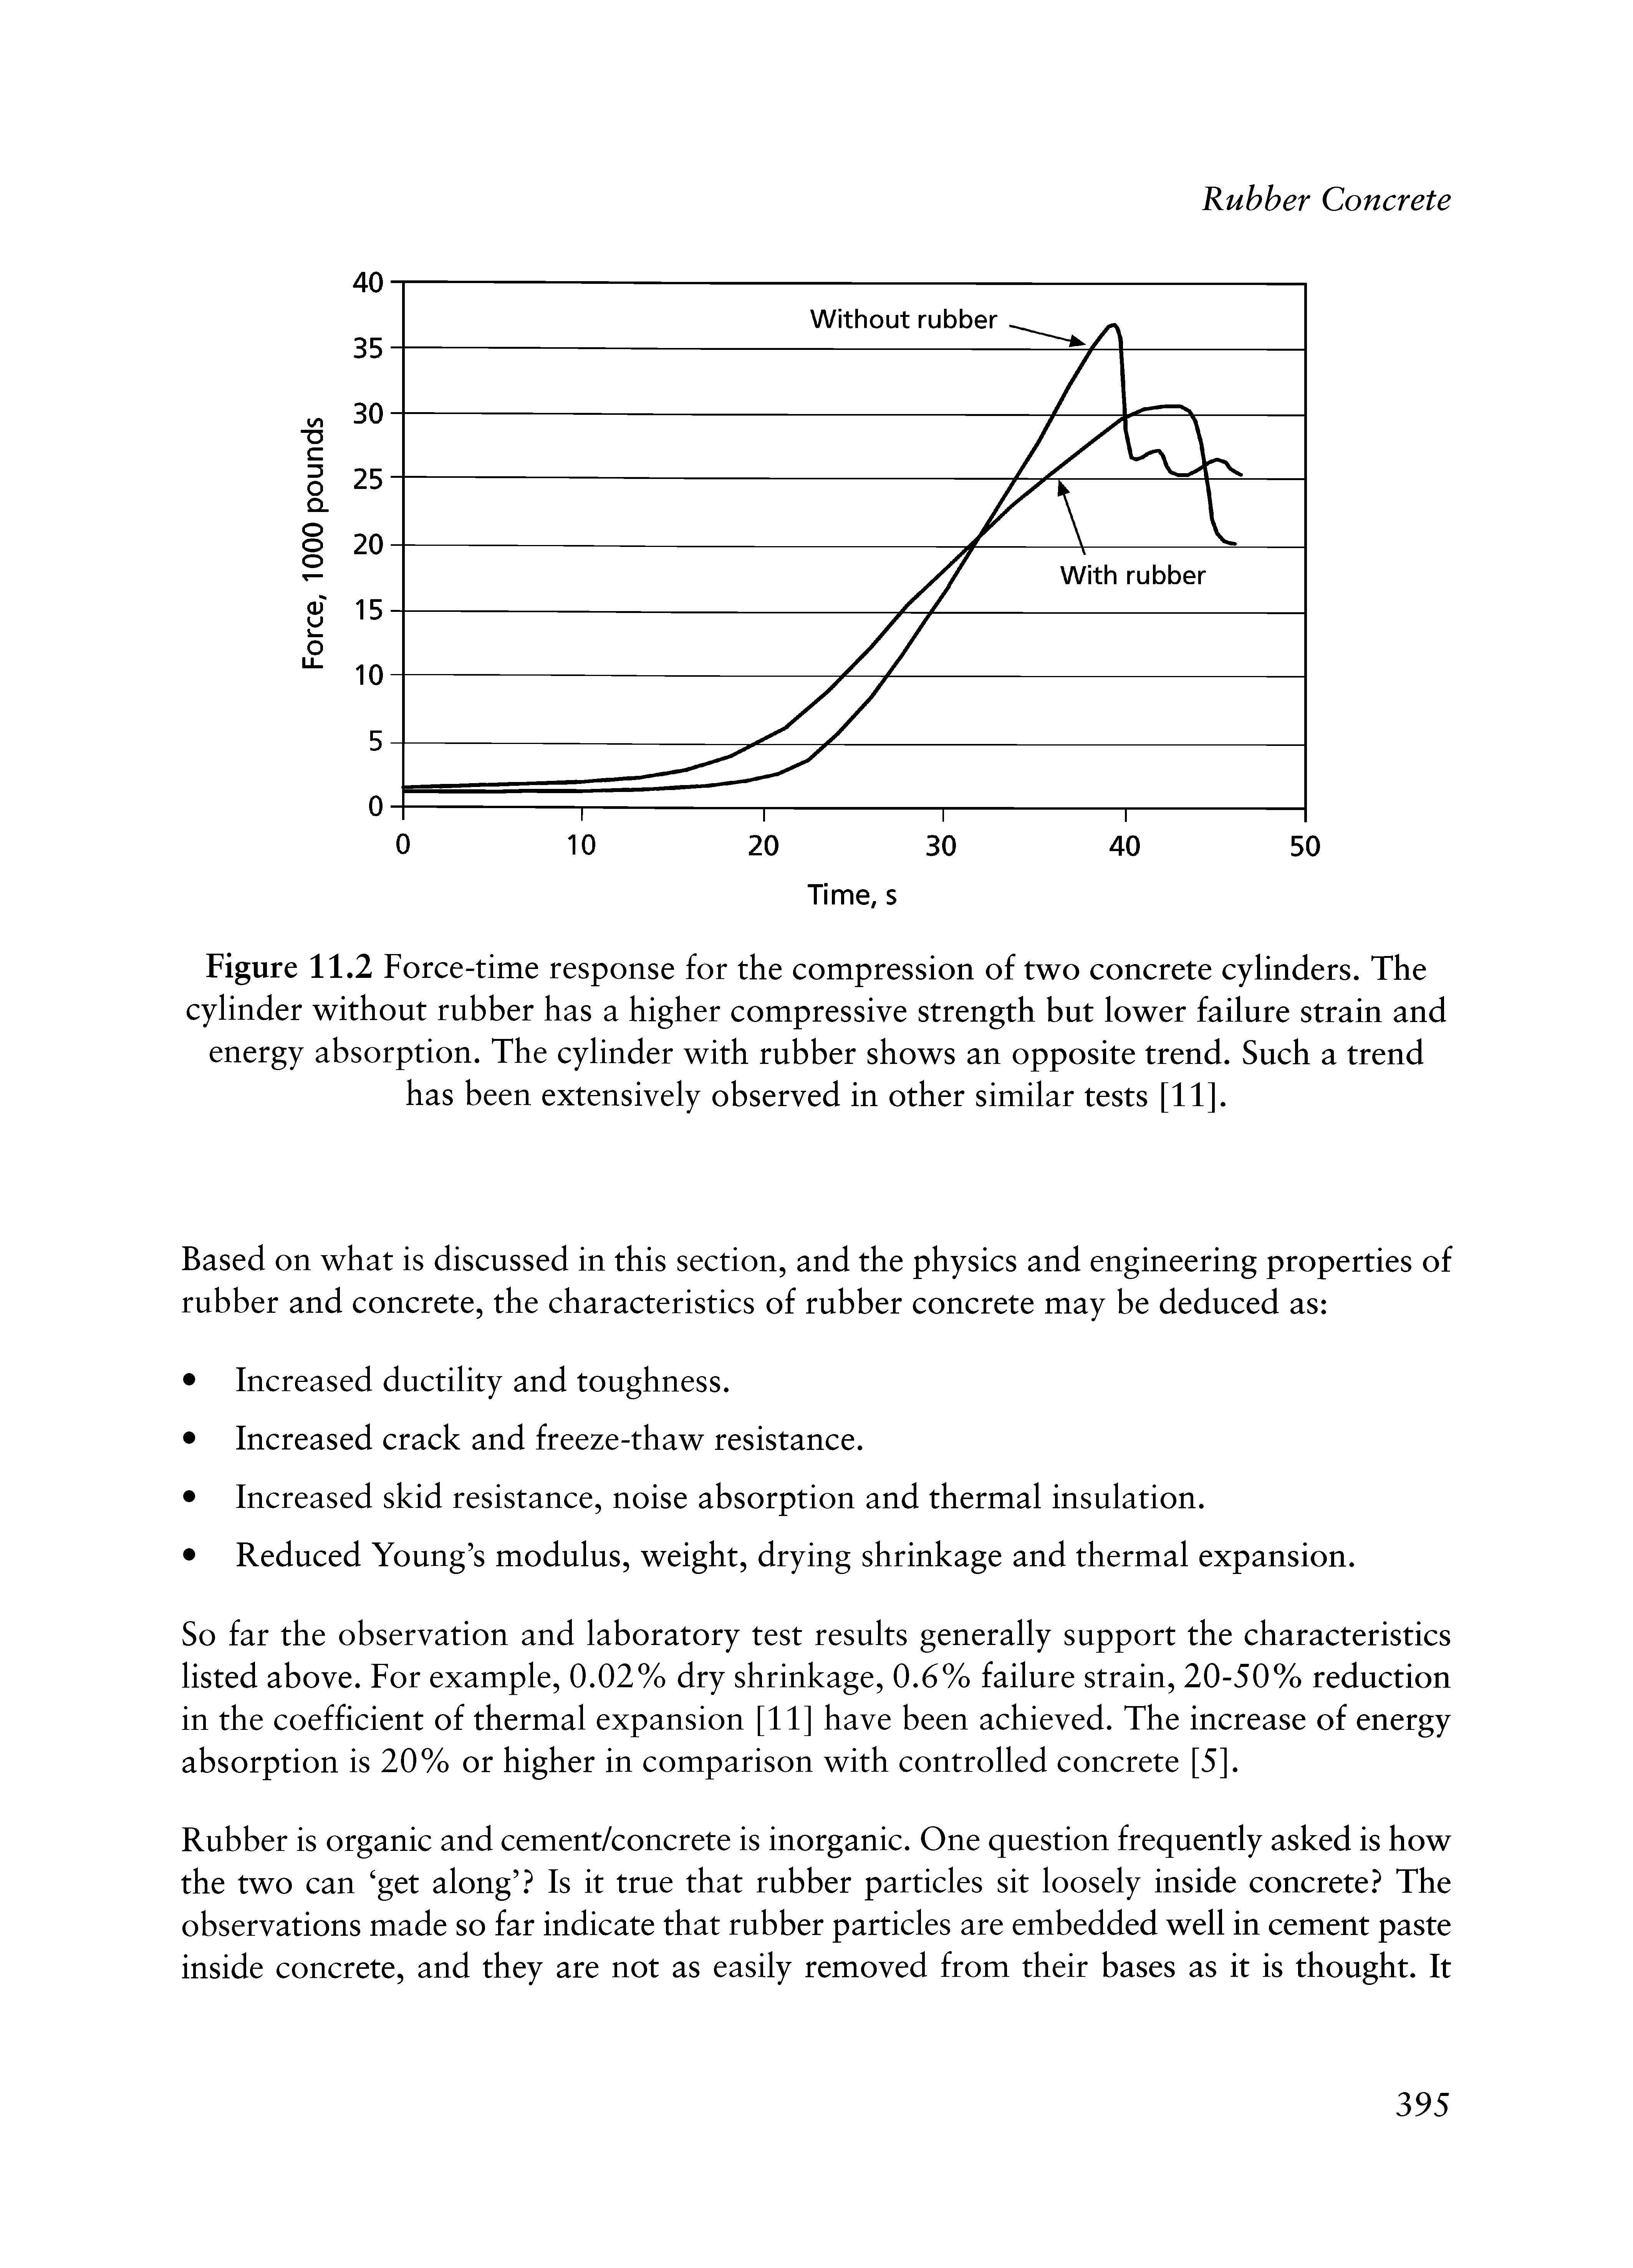 Figure 11.2 Force-time response for the compression of two concrete cylinders. The cylinder without rubber has a higher compressive strength but lower failure strain and energy absorption. The cylinder with rubber shows an opposite trend. Such a trend has been extensively observed in other similar tests [11].